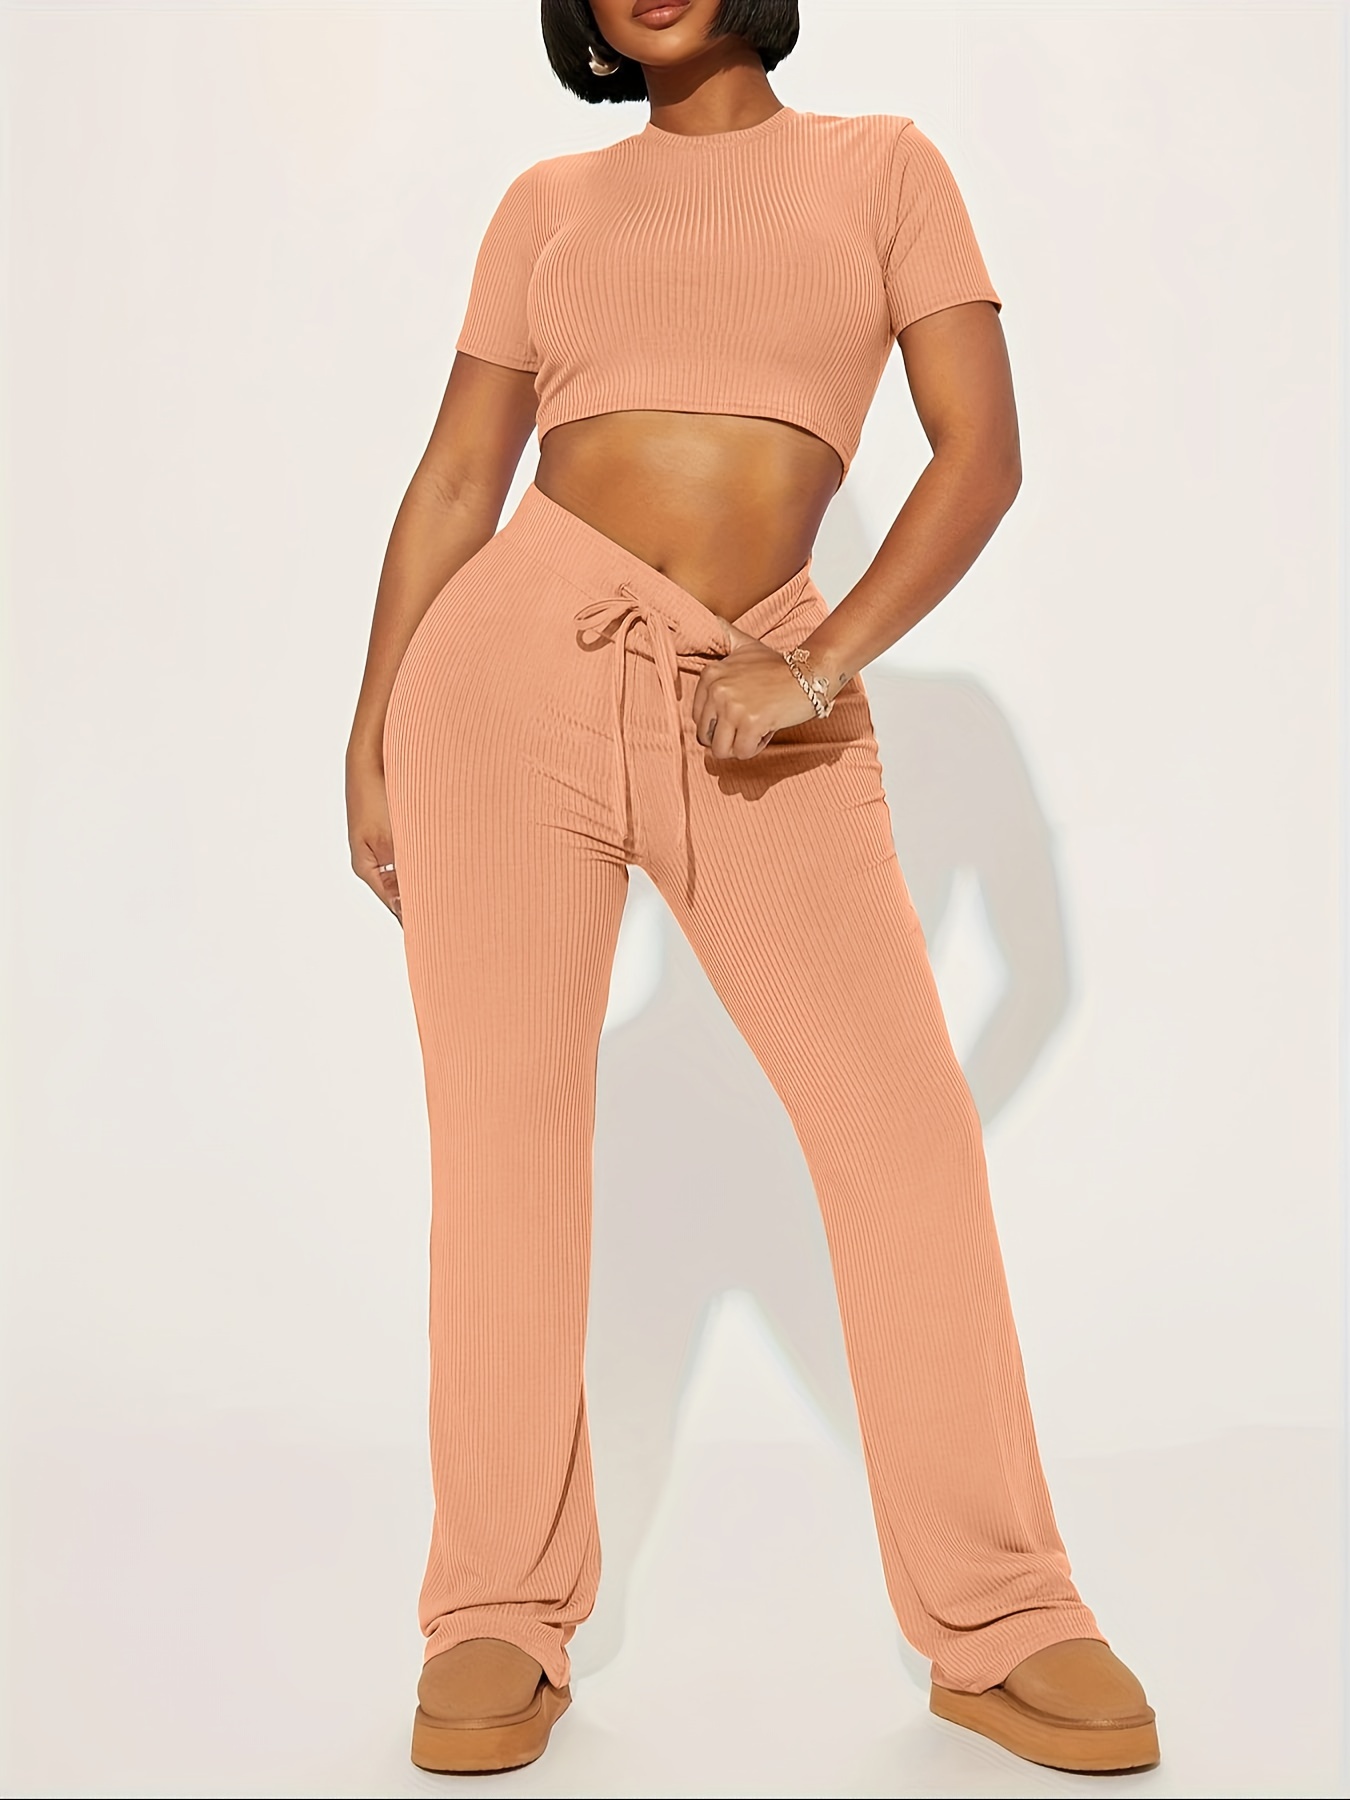 Solid Casual Two-piece Set, Sleeveless Cropped Tops & Workout Drawstring  Leggings Outfits, Women's Clothing